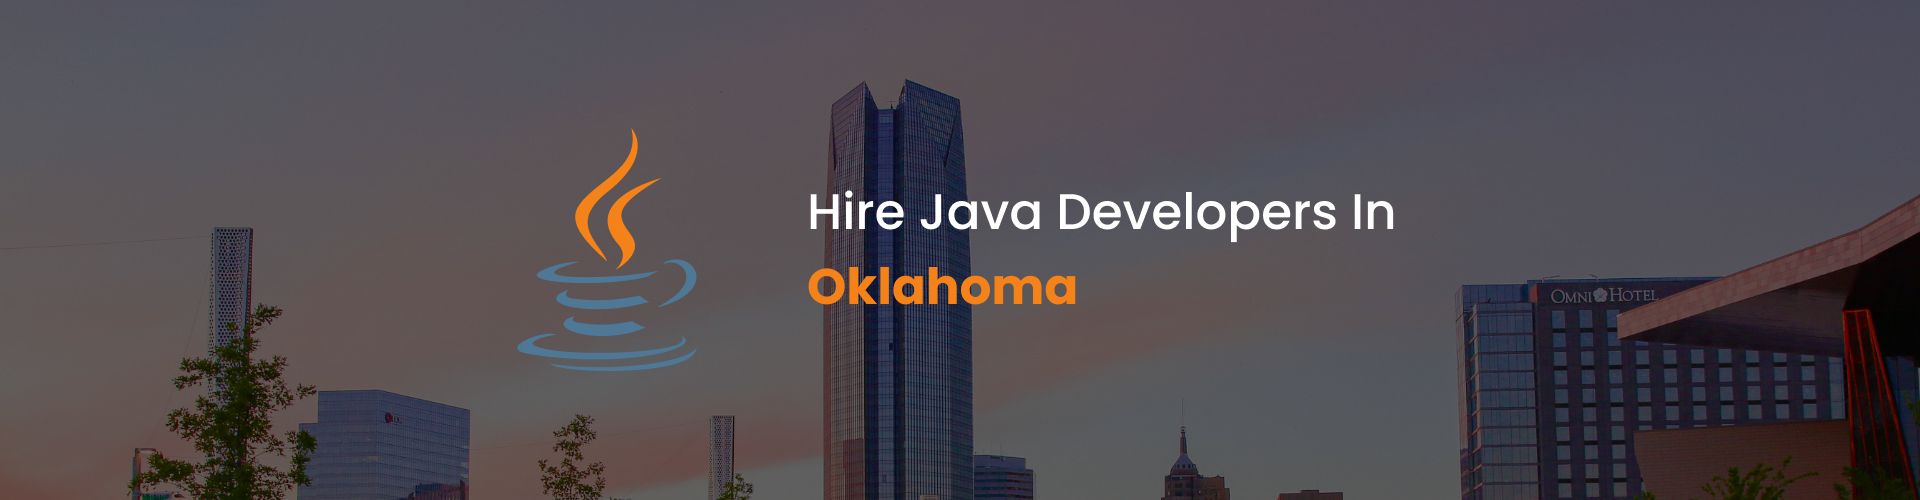 hire java developers in oklahoma